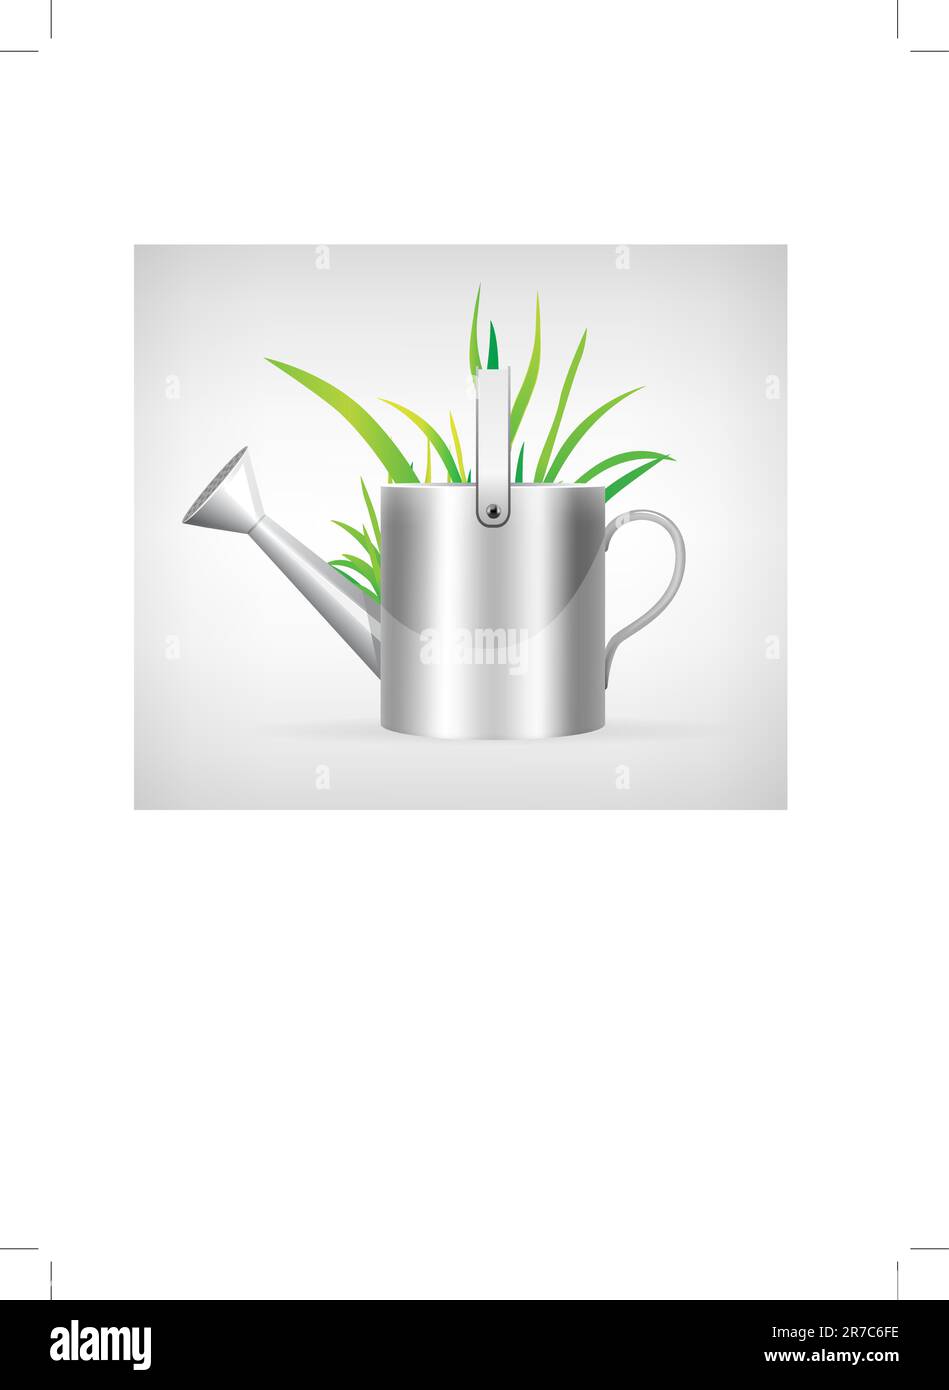 watering can and grass illustration isolated on white background Stock Vector